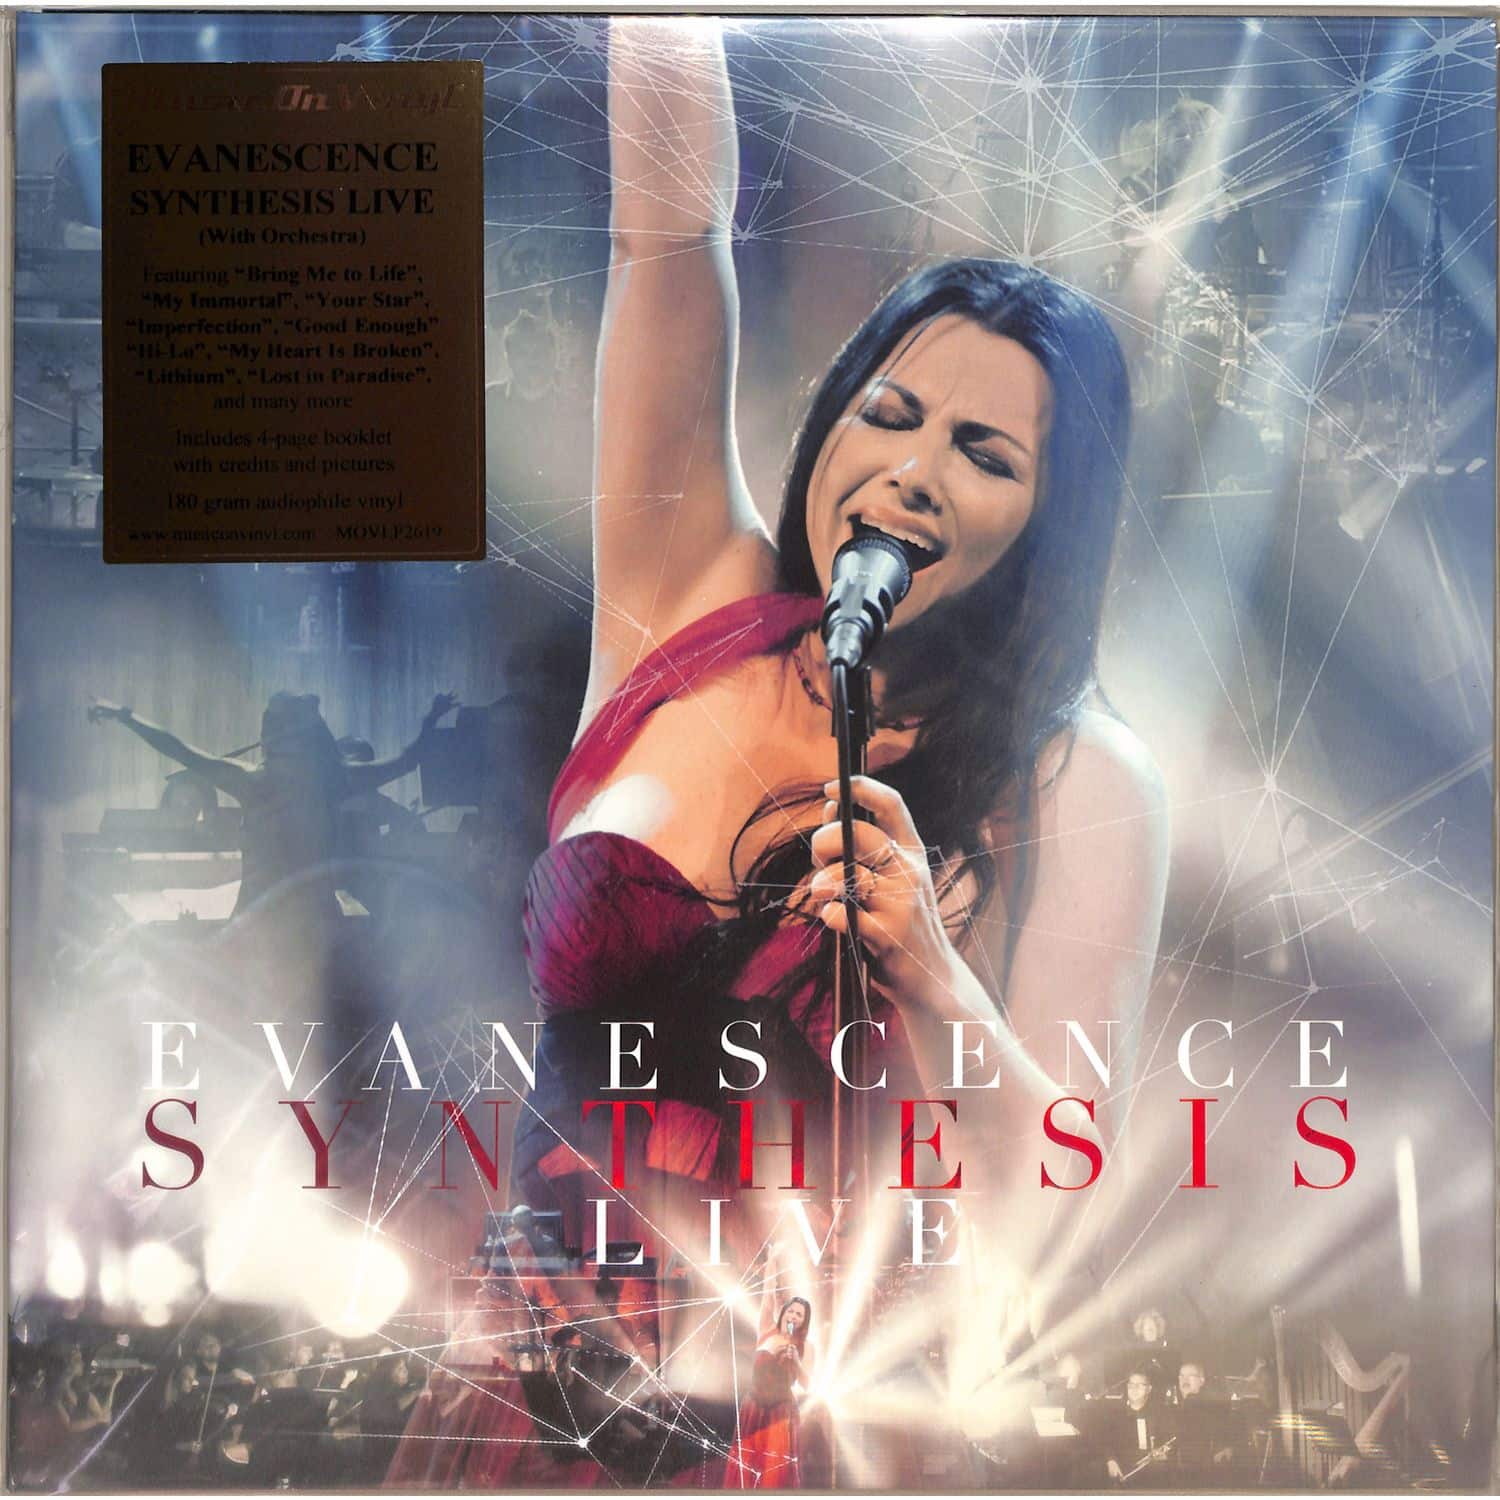 Evanescence - SYNTHESIS LIVE 